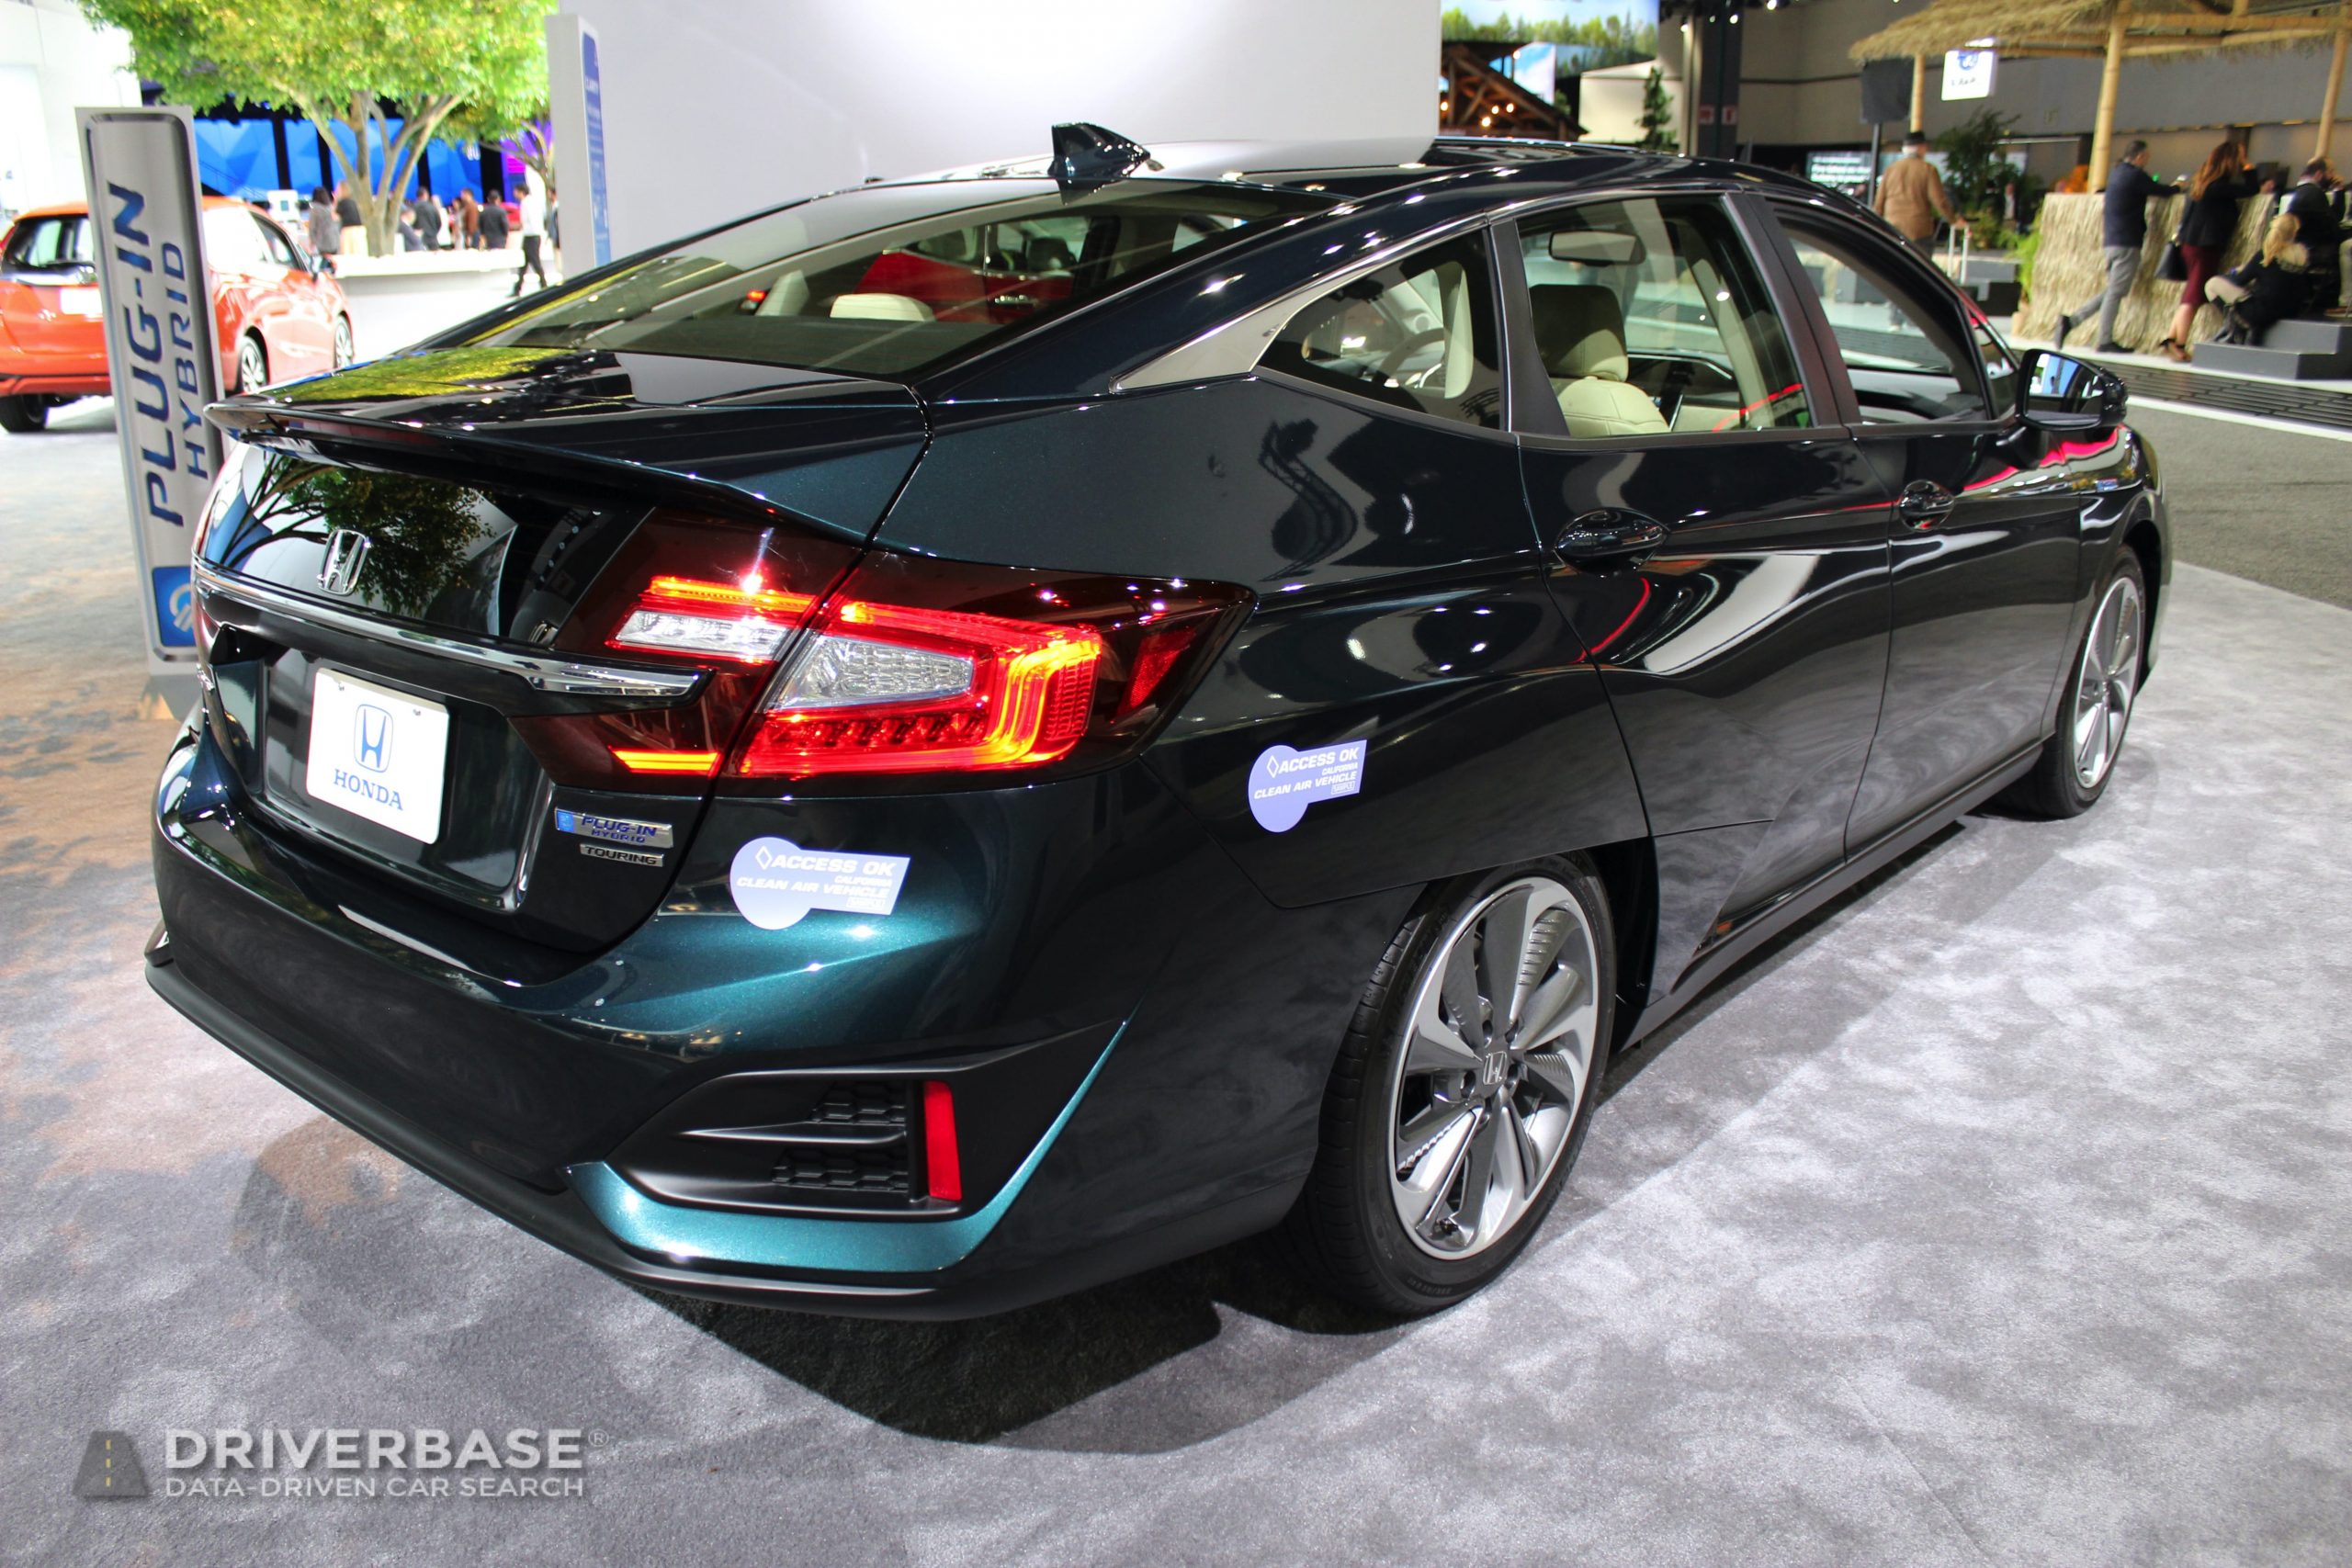 2020 Honda Clarity Touring Plug-In Hybrid at the 2019 Los Angeles Auto Show